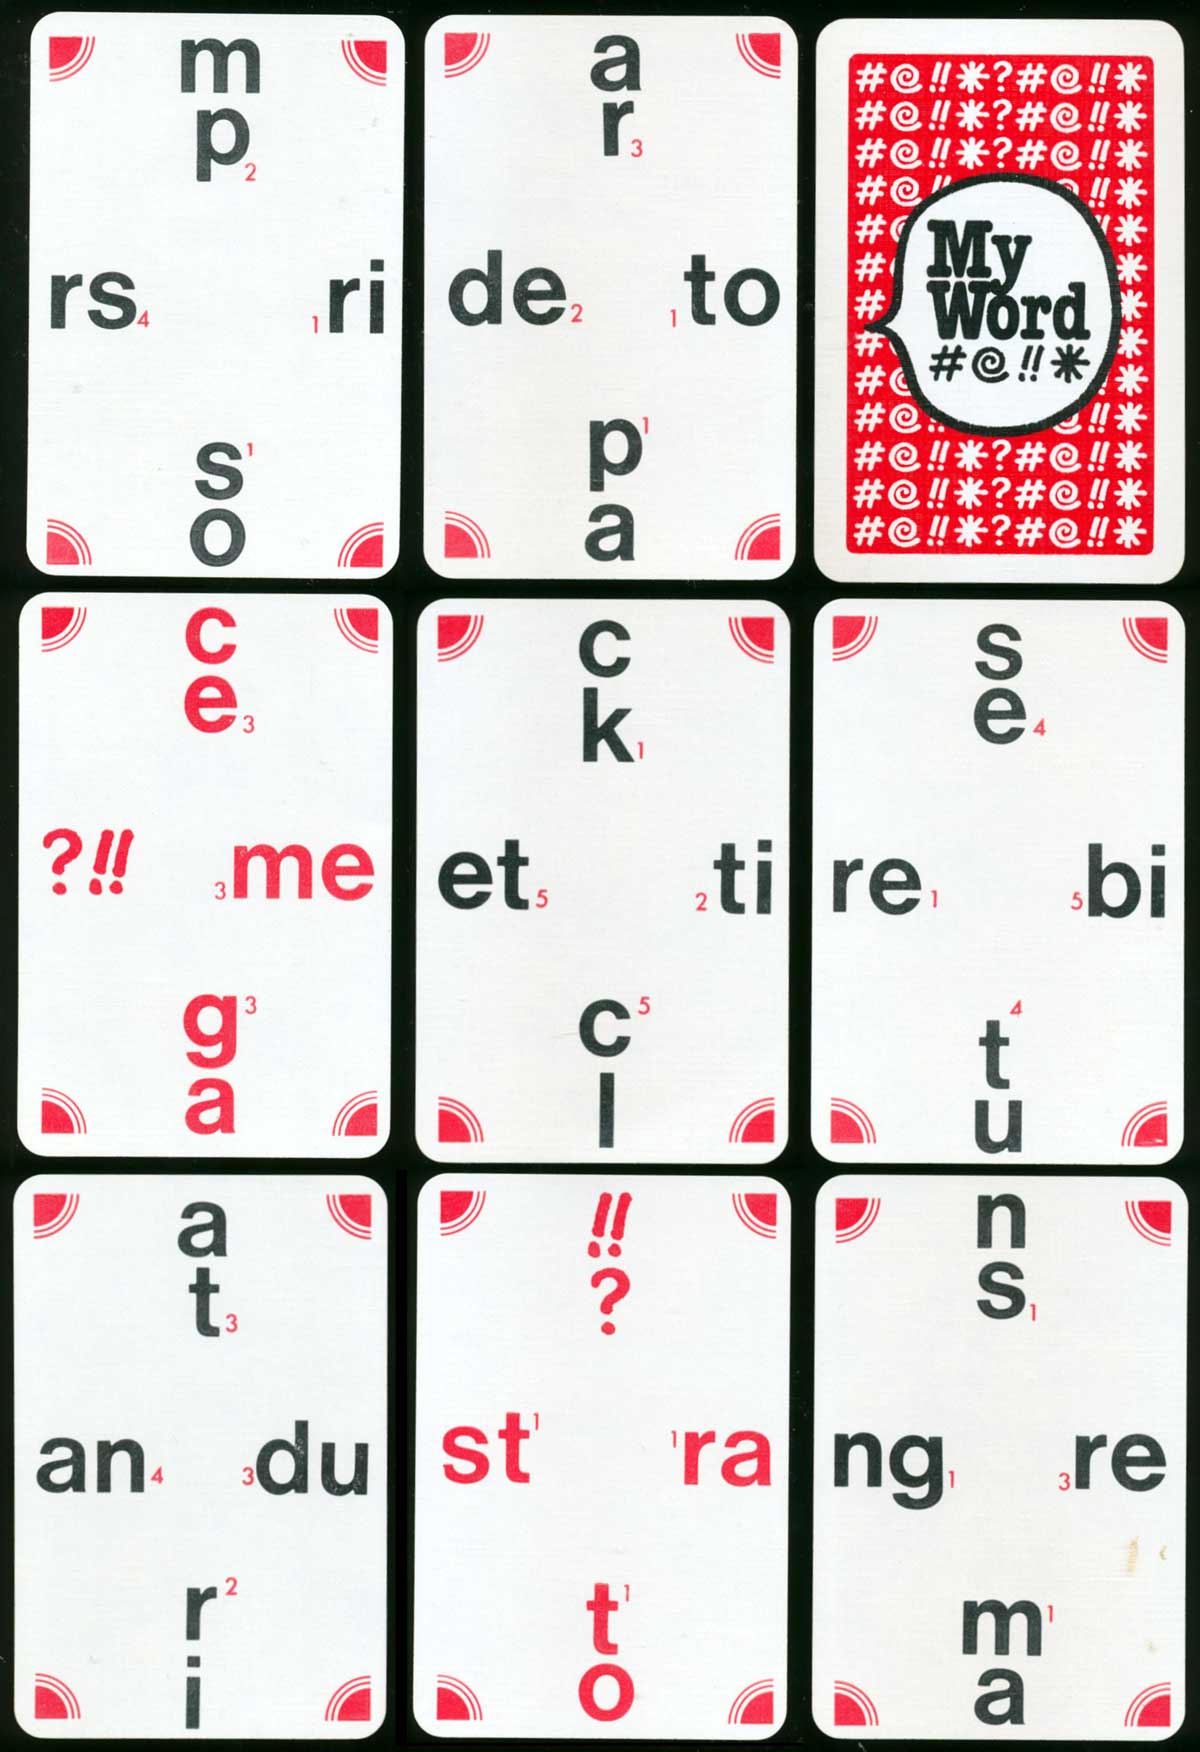 My Word published in 1980 by Waddingtons